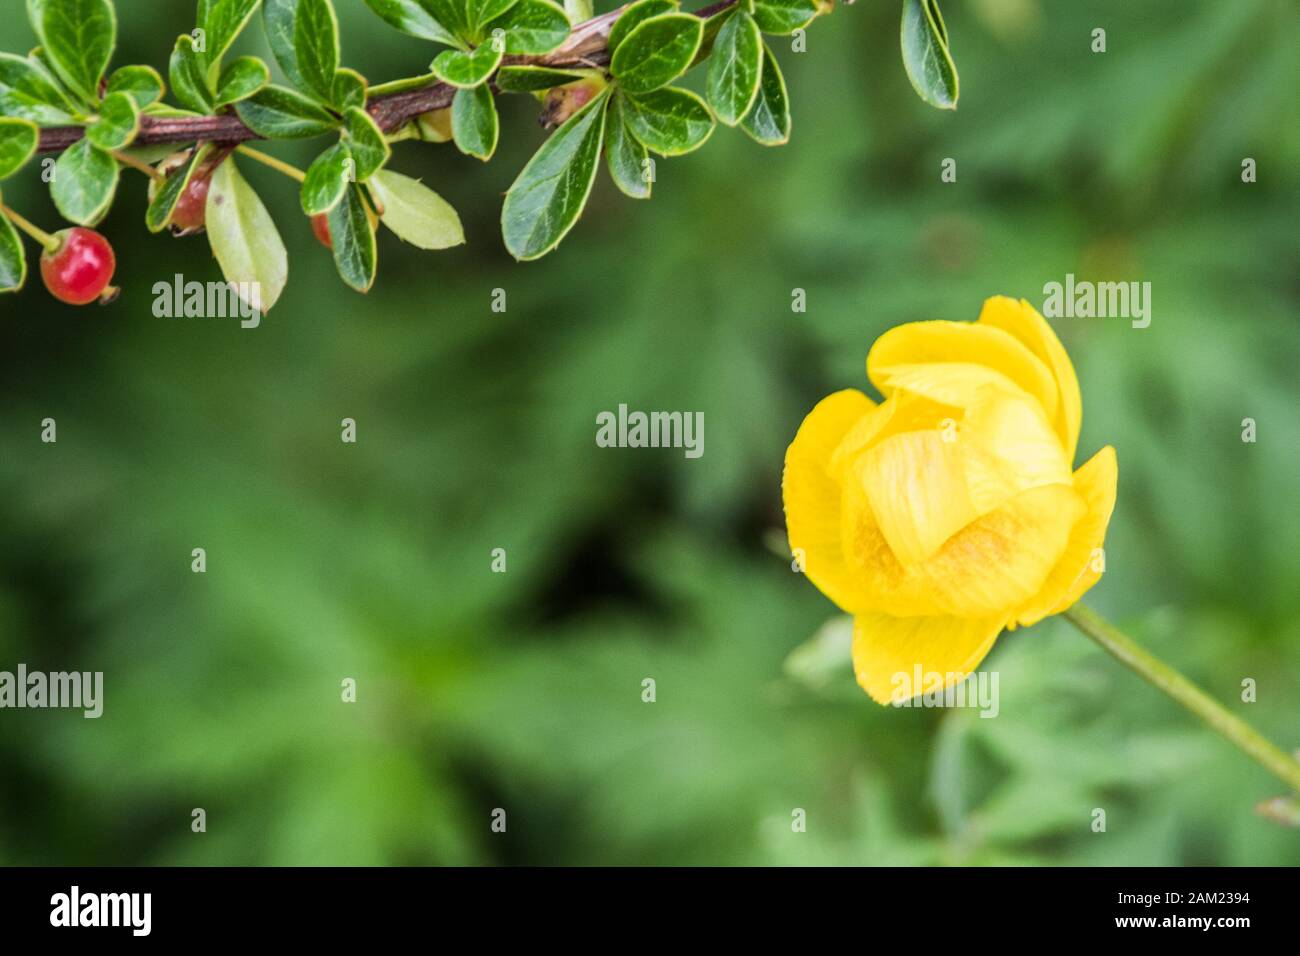 Beautiful yellow flowers with green leaves background Stock Photo